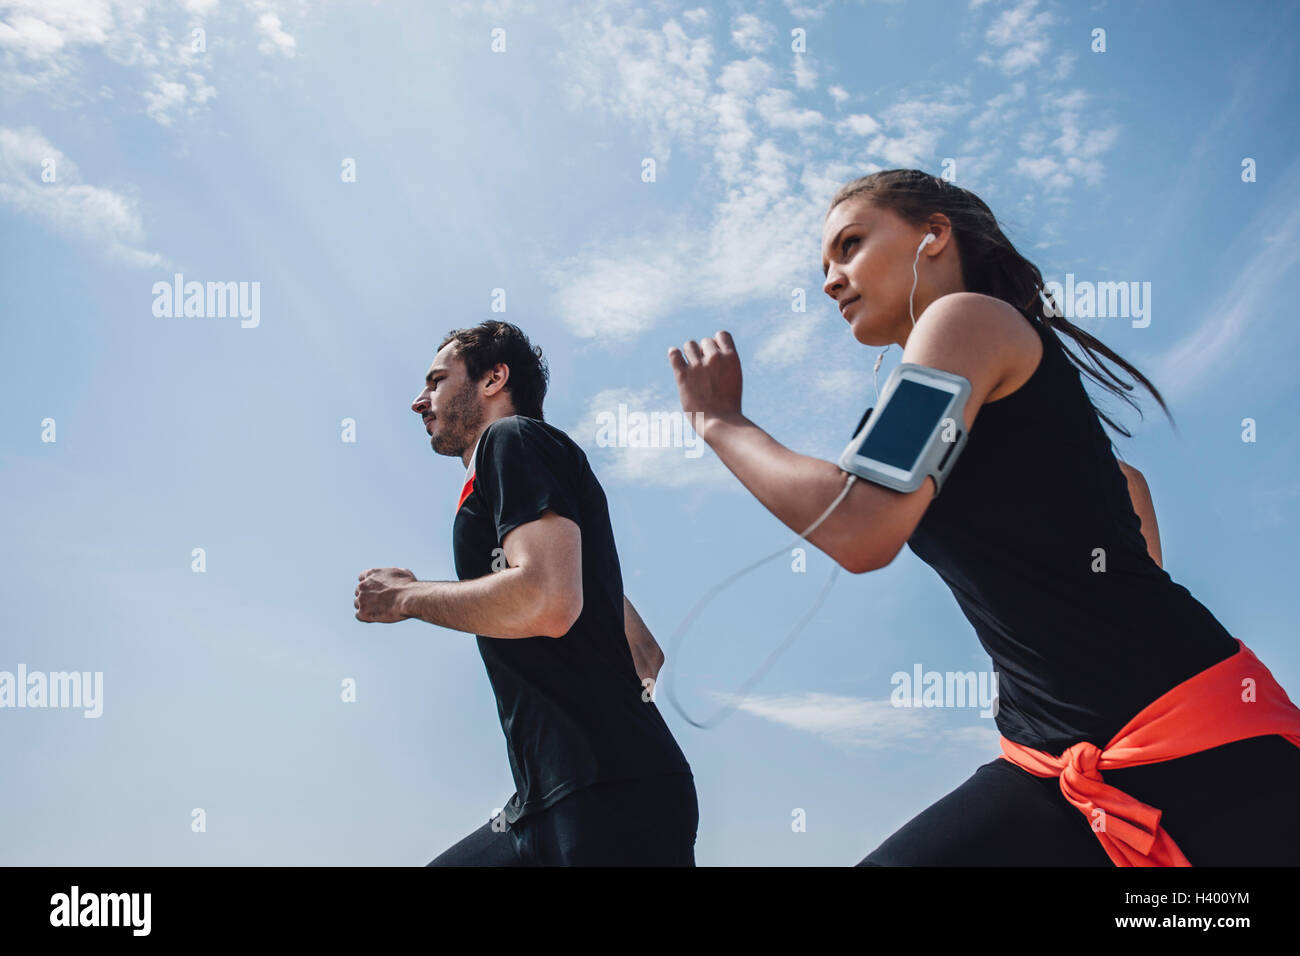 Low angle view of young man and woman jogging against sky Stock Photo